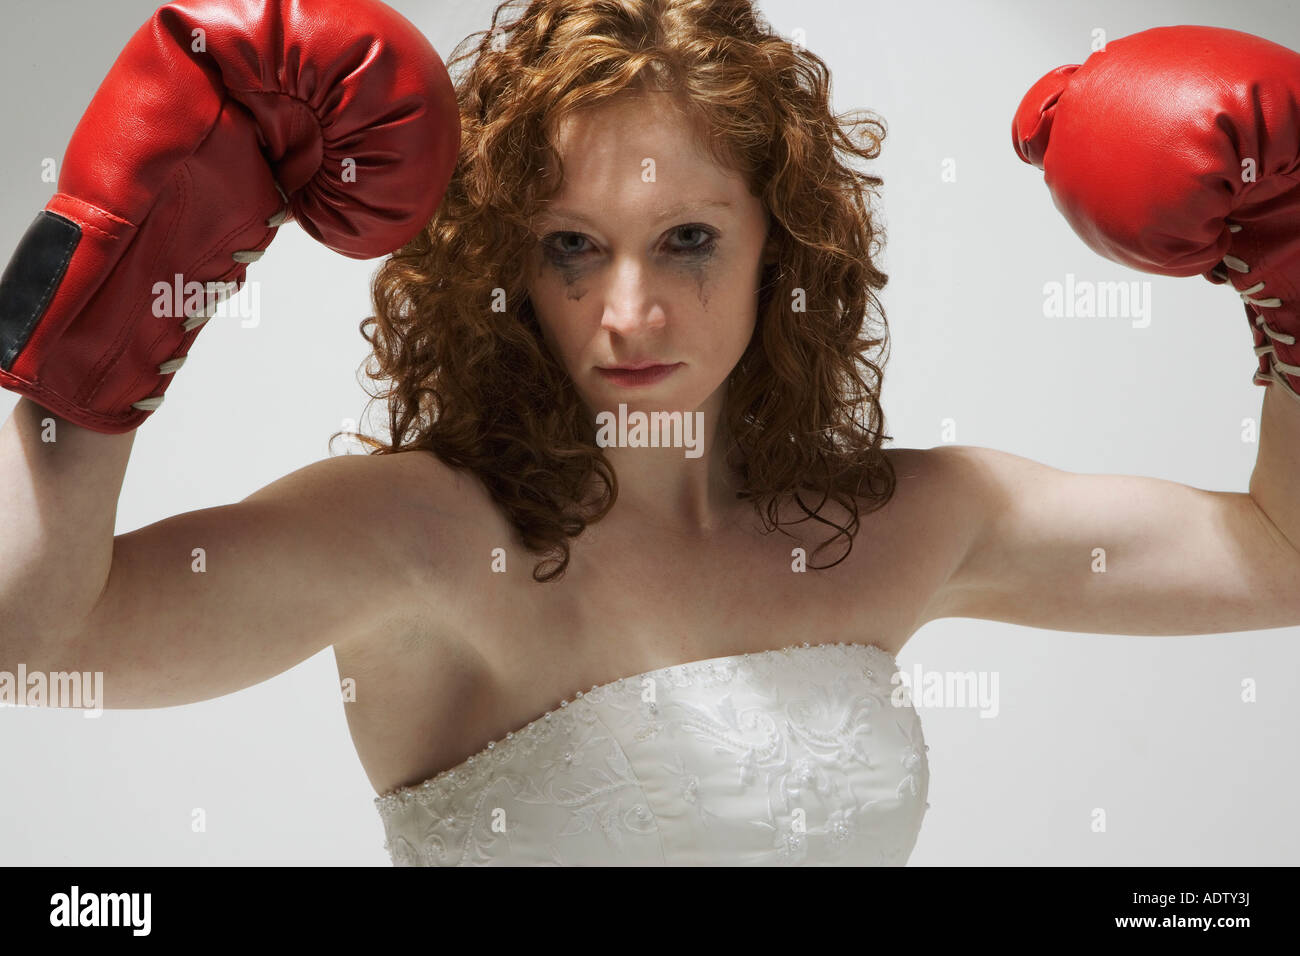 Woman in wedding dress with boxing gloves Stock Photo